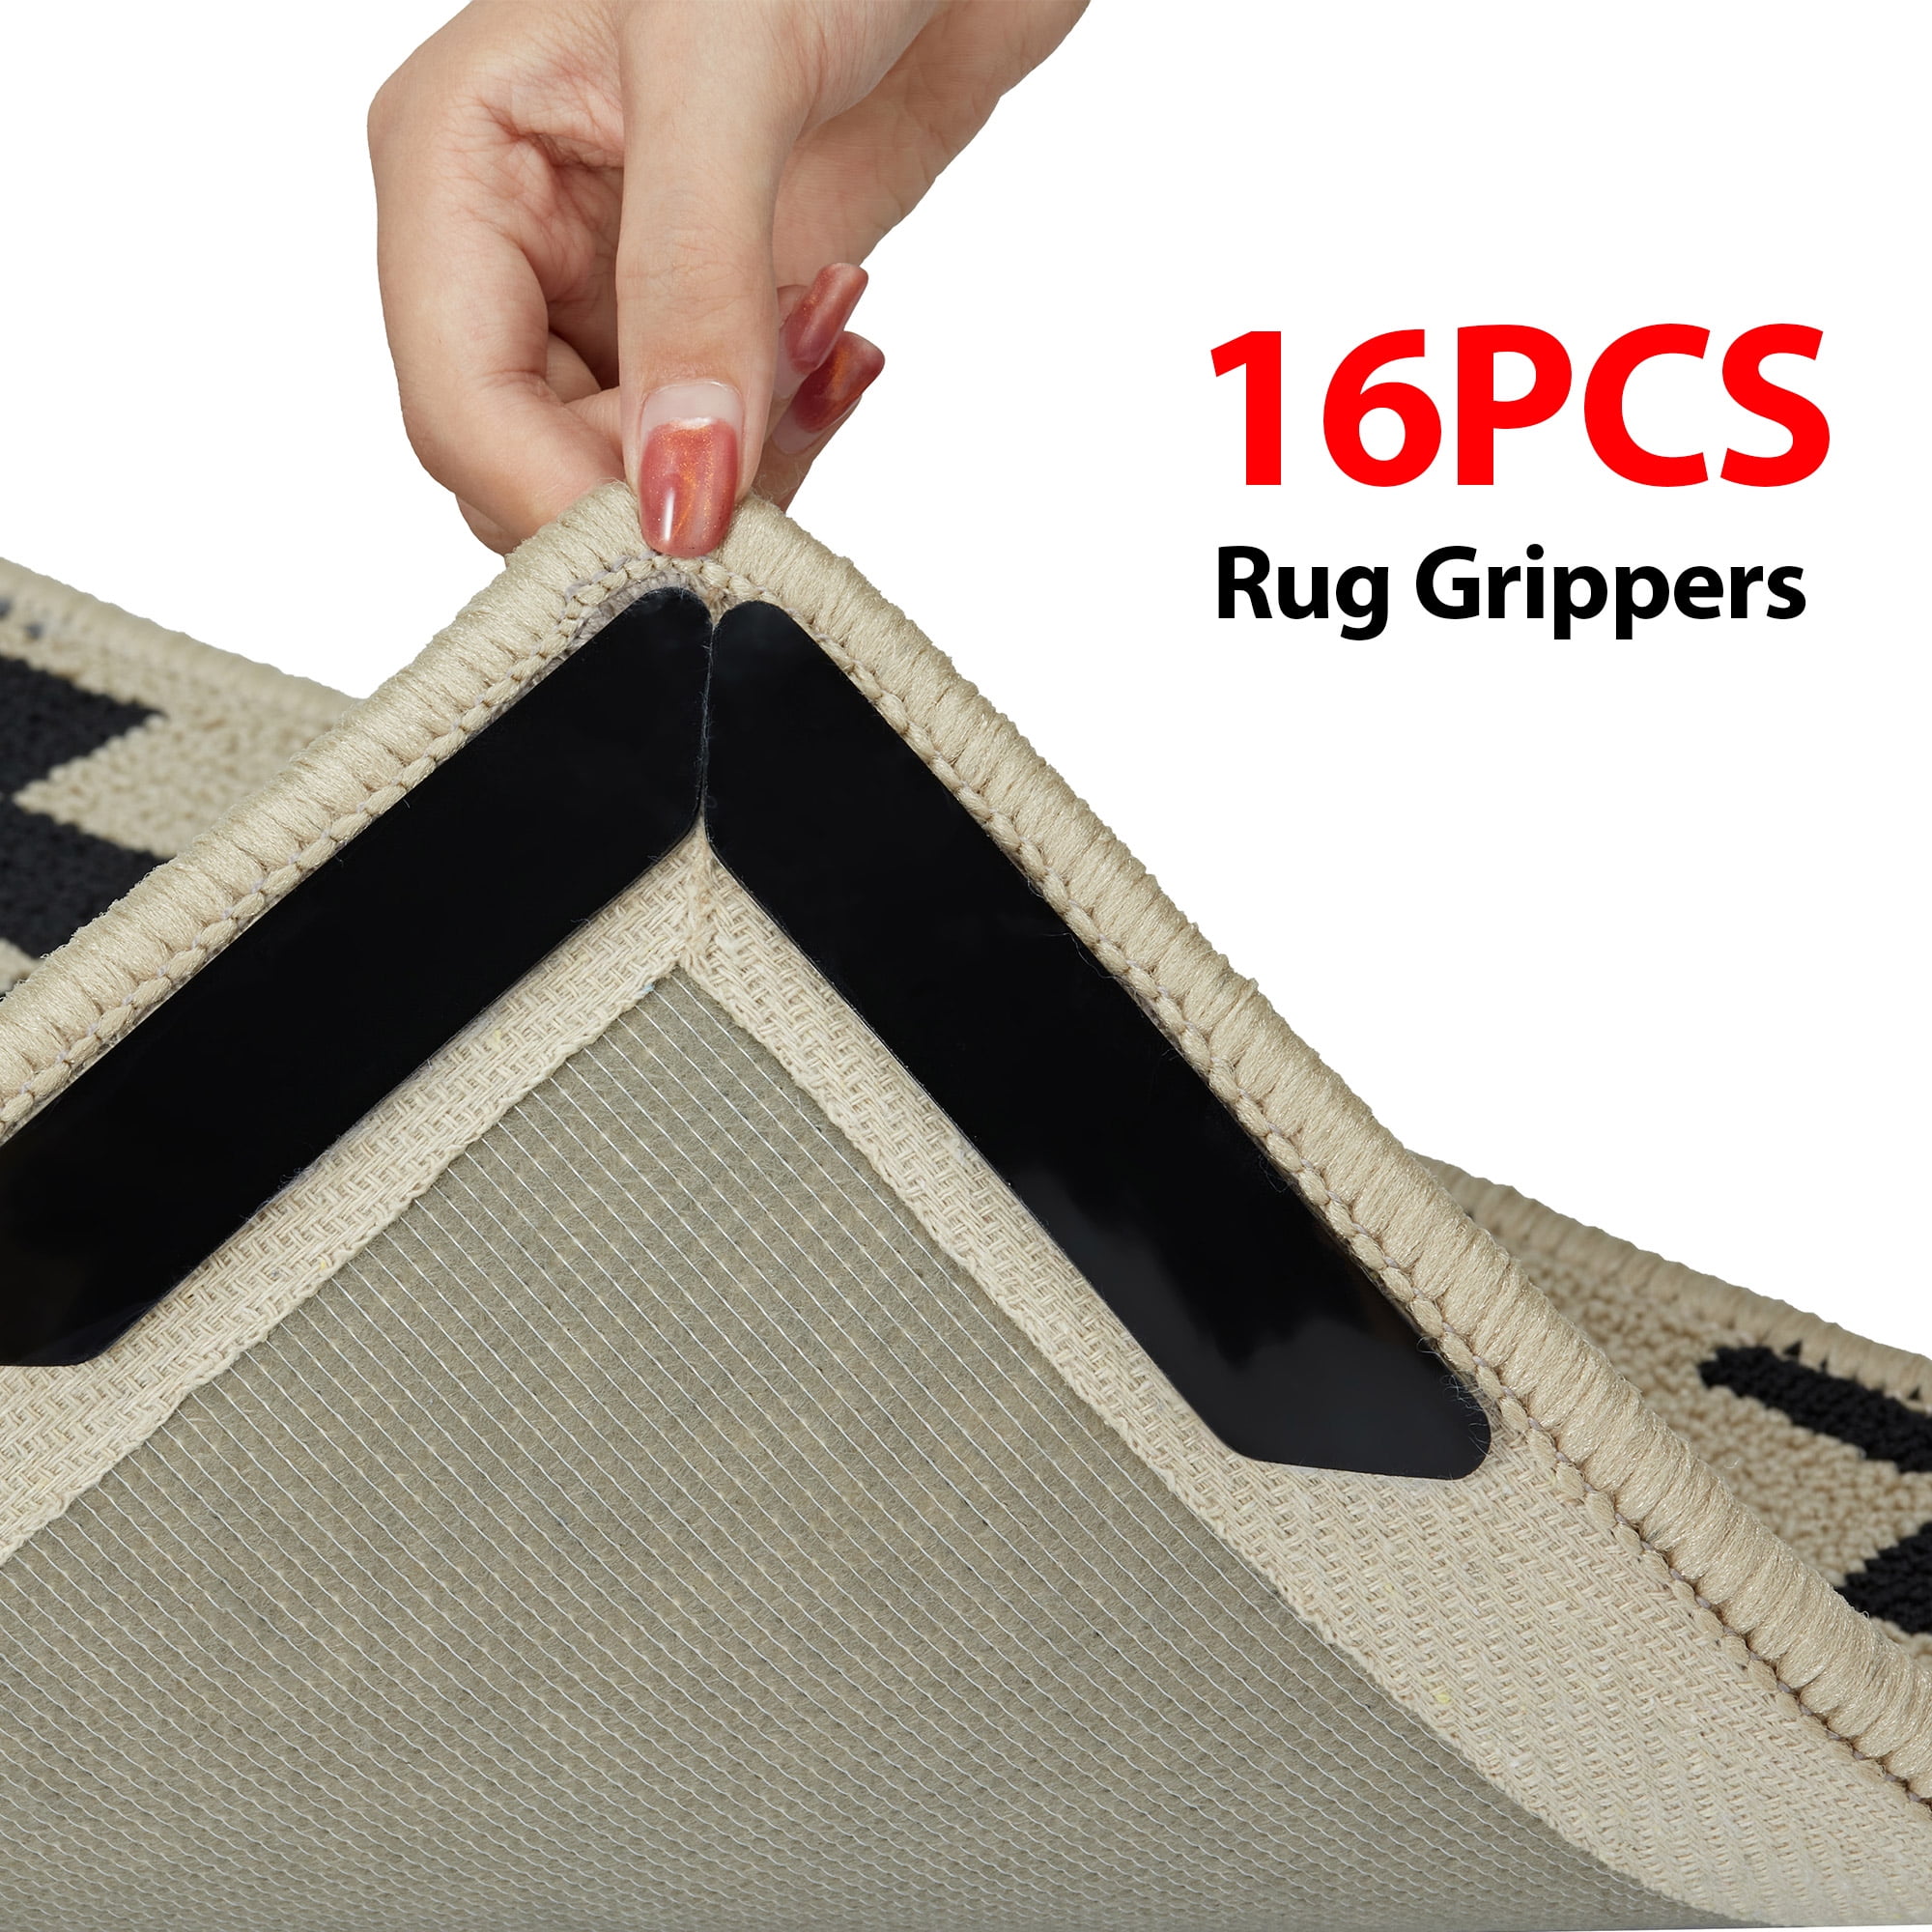 Rug Gripper Tape - Carpet Tape Double Sided - Rug Tape for Hardwood Floor -  Non Slip Pads for Area Rugs - Carpet Binding Tape, Heavy Duty Stickers Grip,  Anti Curling Pad